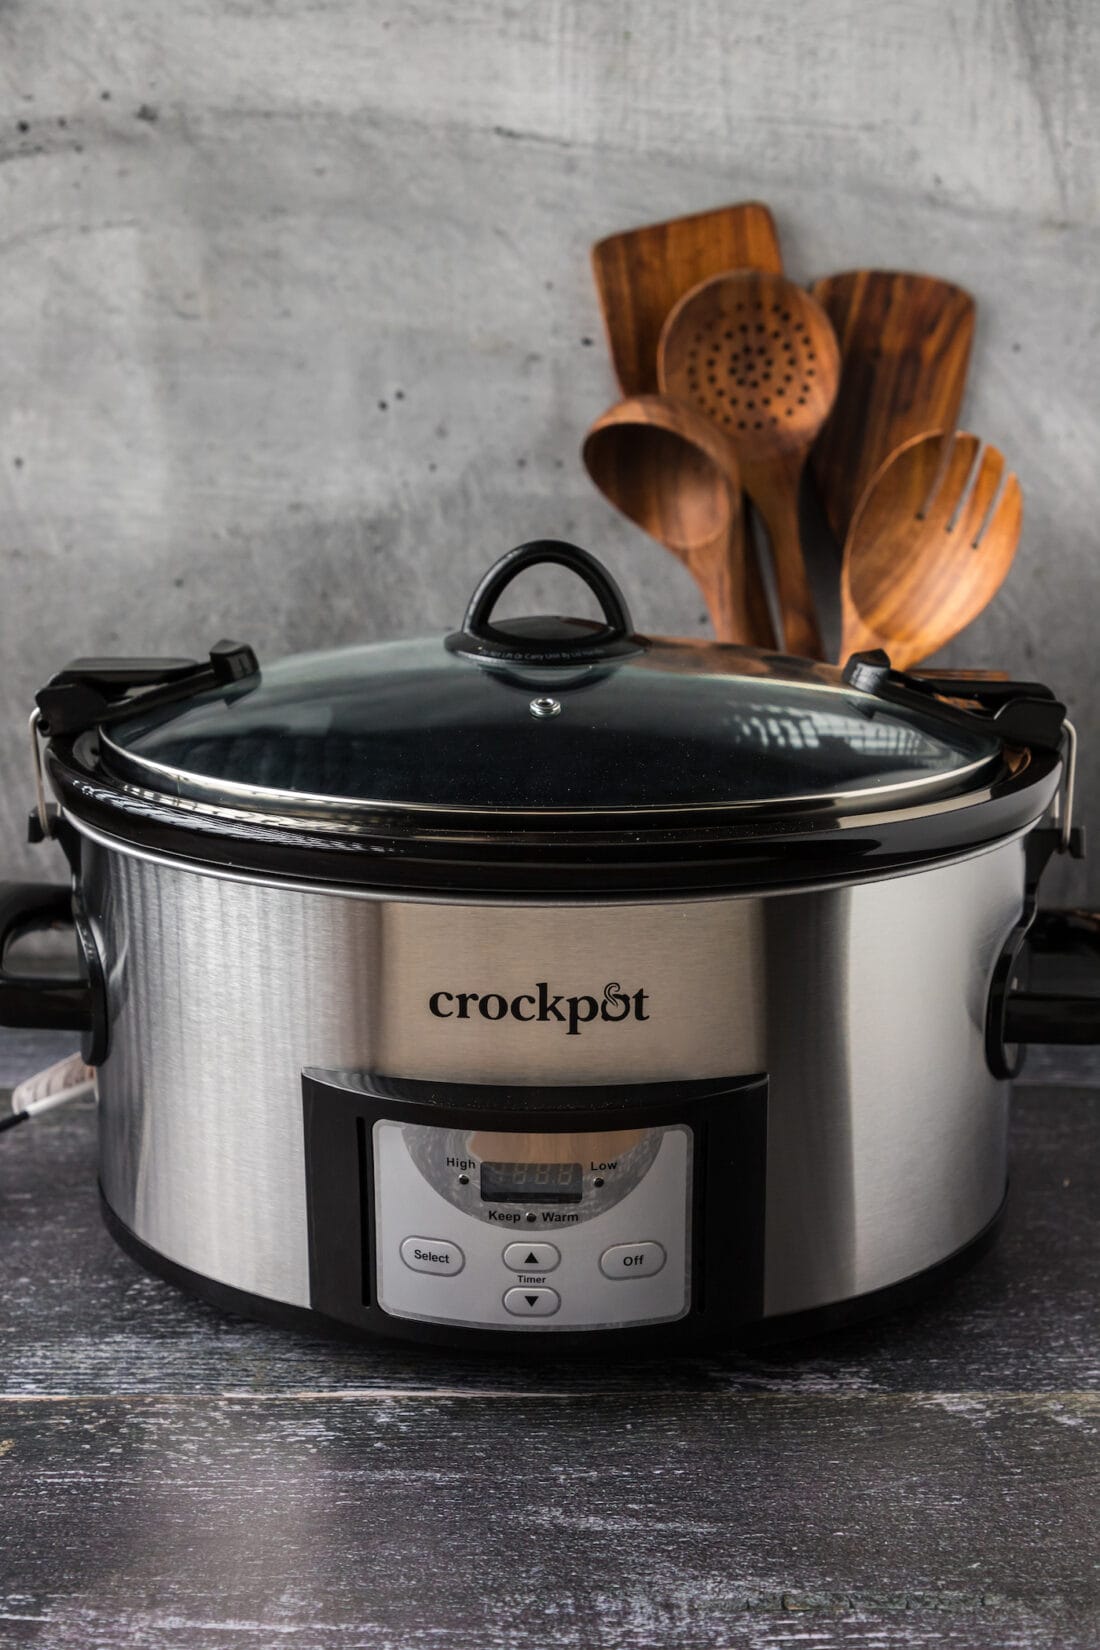 How to use your slow cooker properly